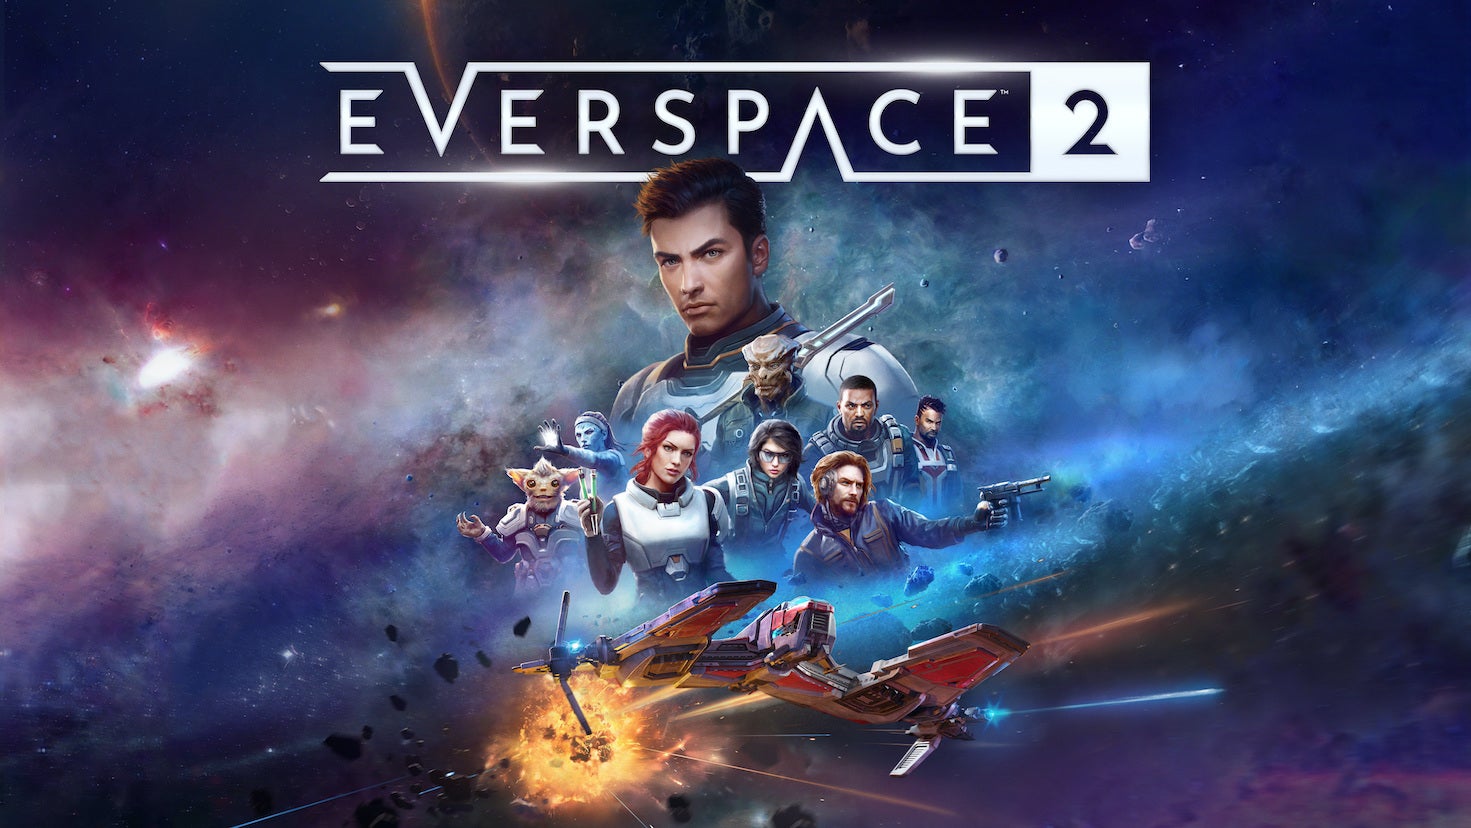 Title image for Everspace 2 showing a group of characters with a spacey background